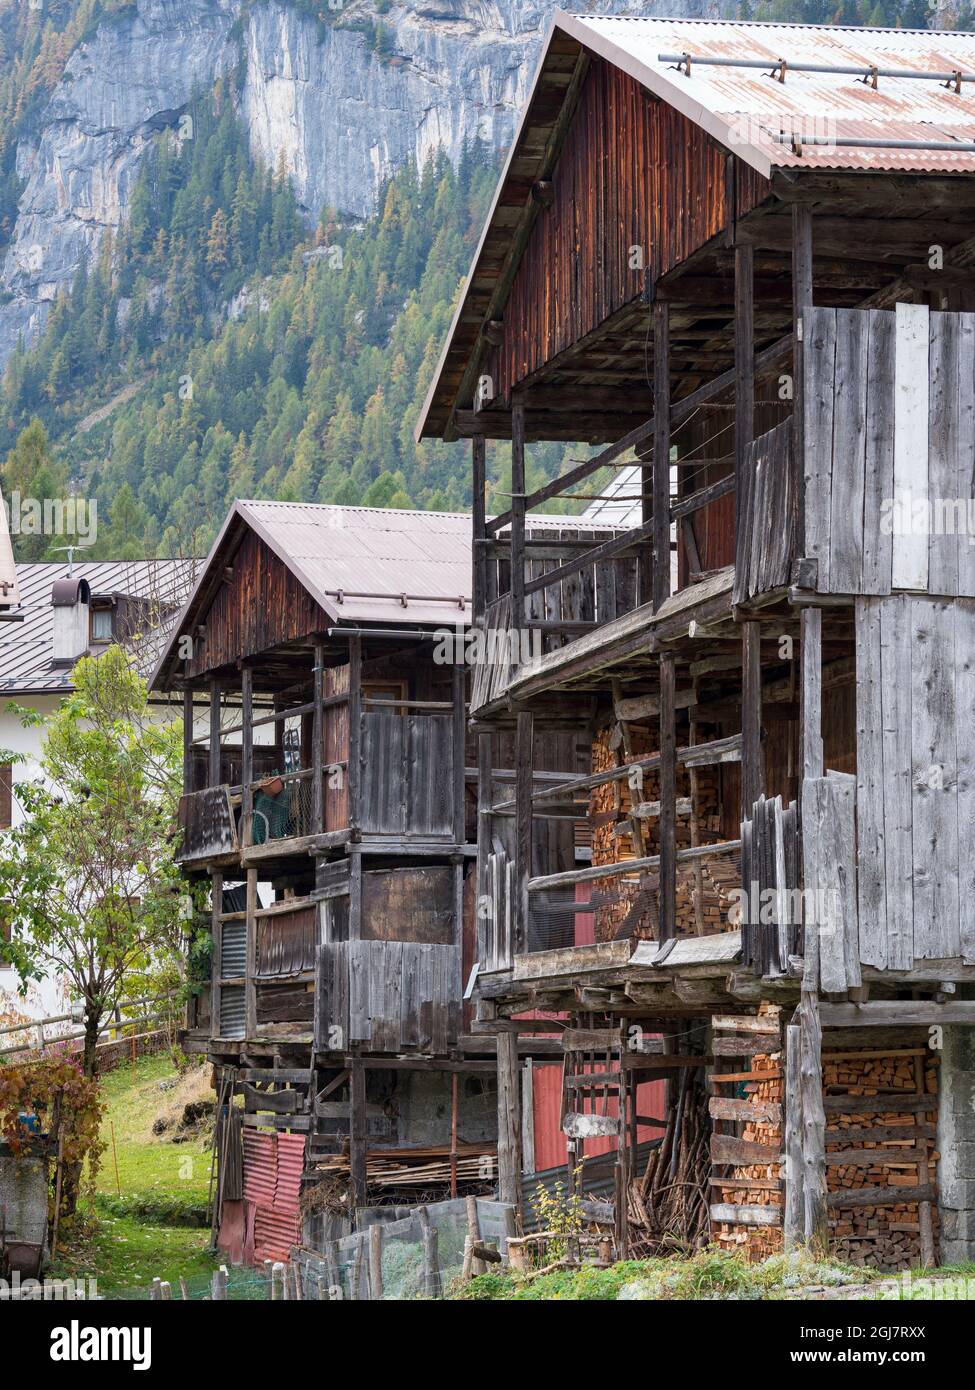 Typical barn called Tabia. Village Gares, traditional alpine architecture in valley Valle di Gares, Pale di San Martino. Pala is part of the UNESCO Wo Stock Photo